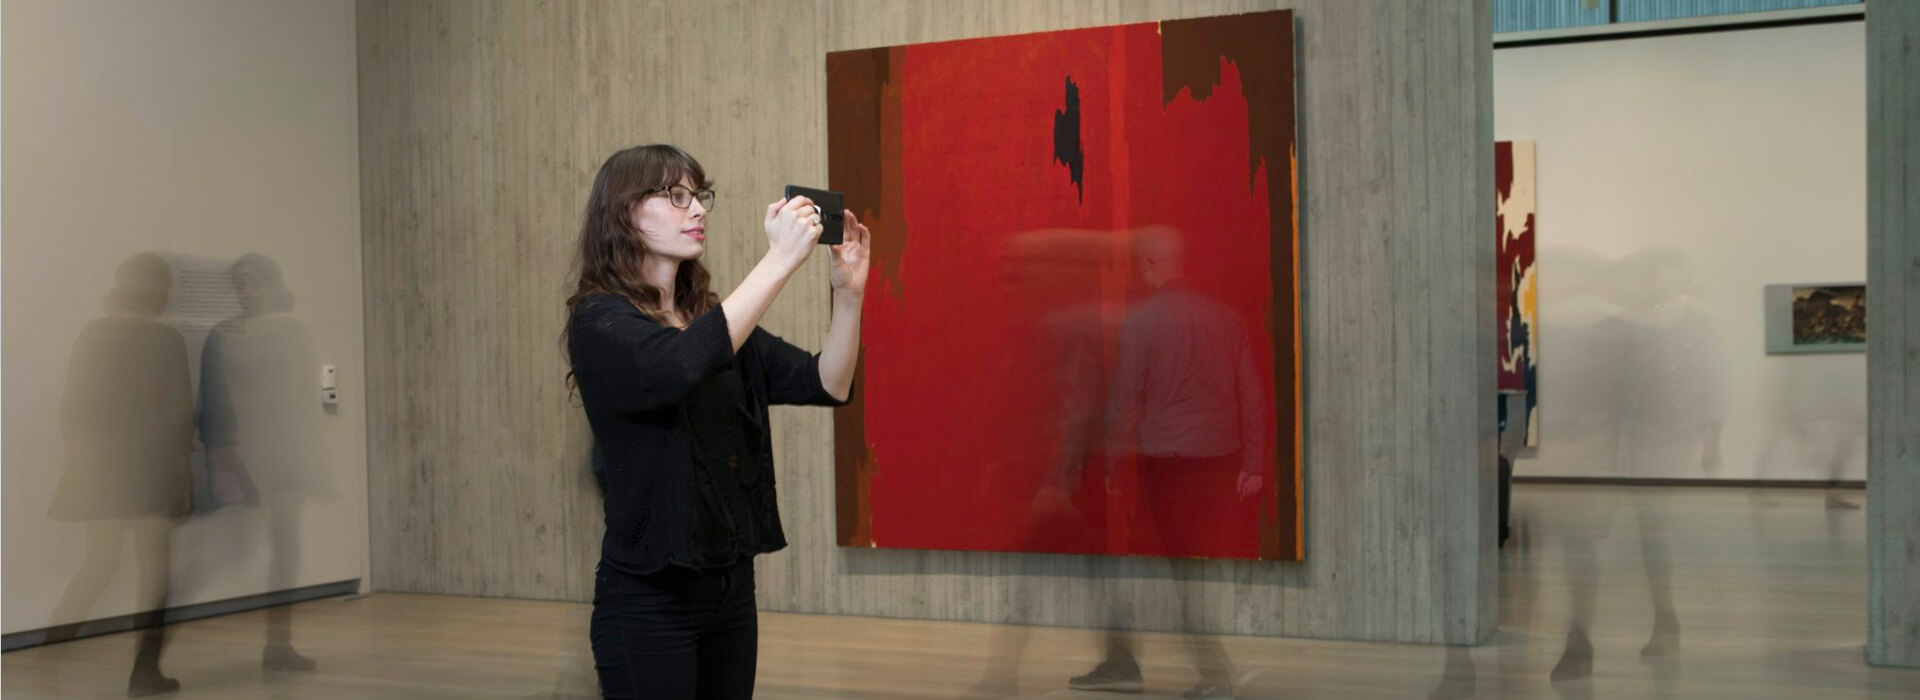 Woman holds up a cell phone and takes a photo of a painting with it while blurred figures appear around her